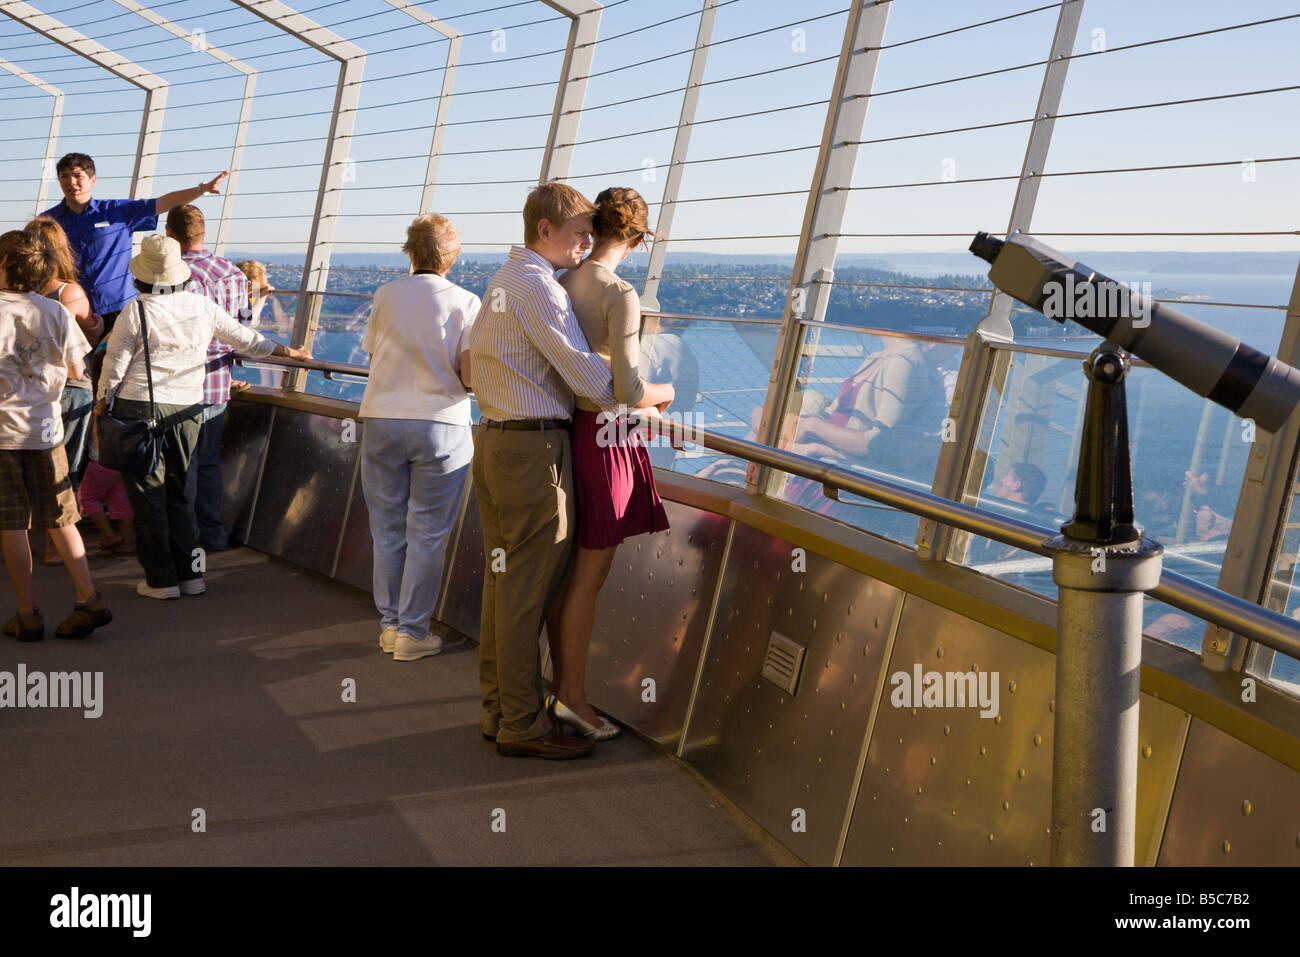 Romantic couple stand together while tour guide talks to visitors on the observation deck of the Space Needle in Seattle, WA Stock Photo